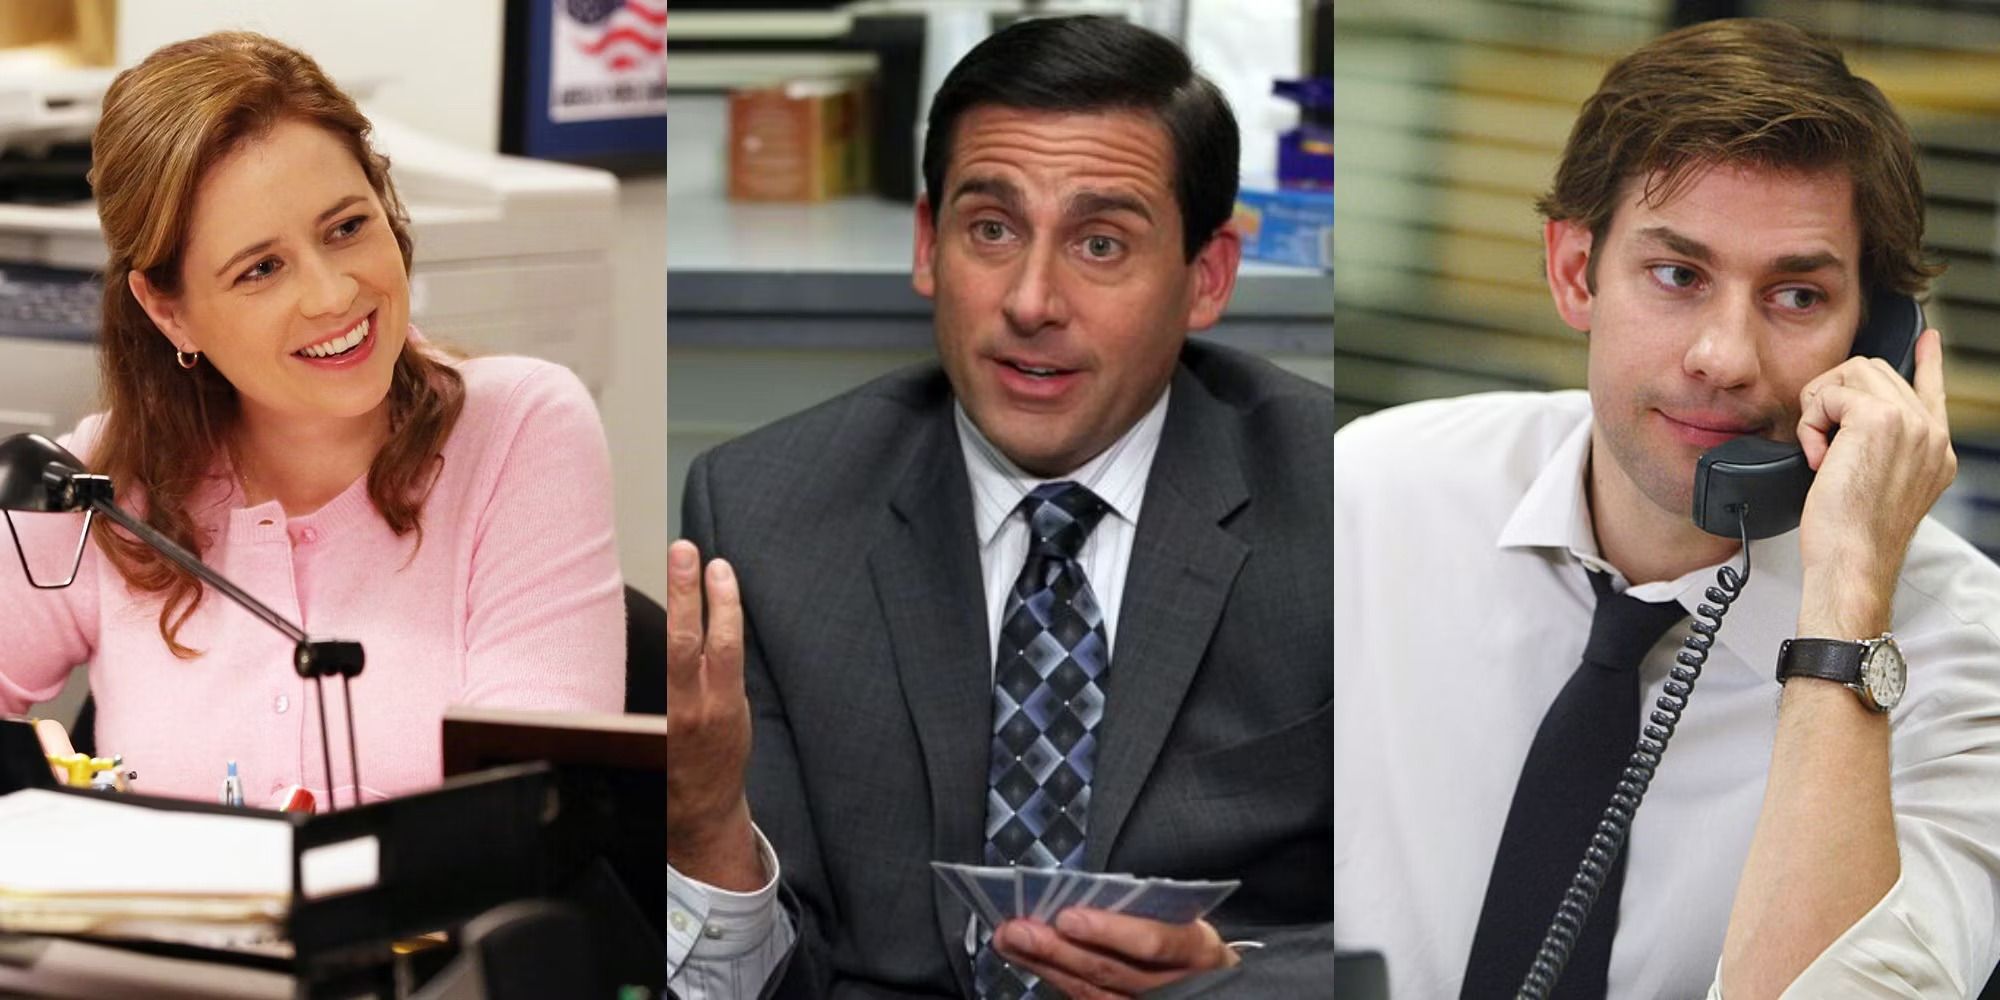 The Office Promotion That Puts You In A Dunder Mifflin Employee's Shoes